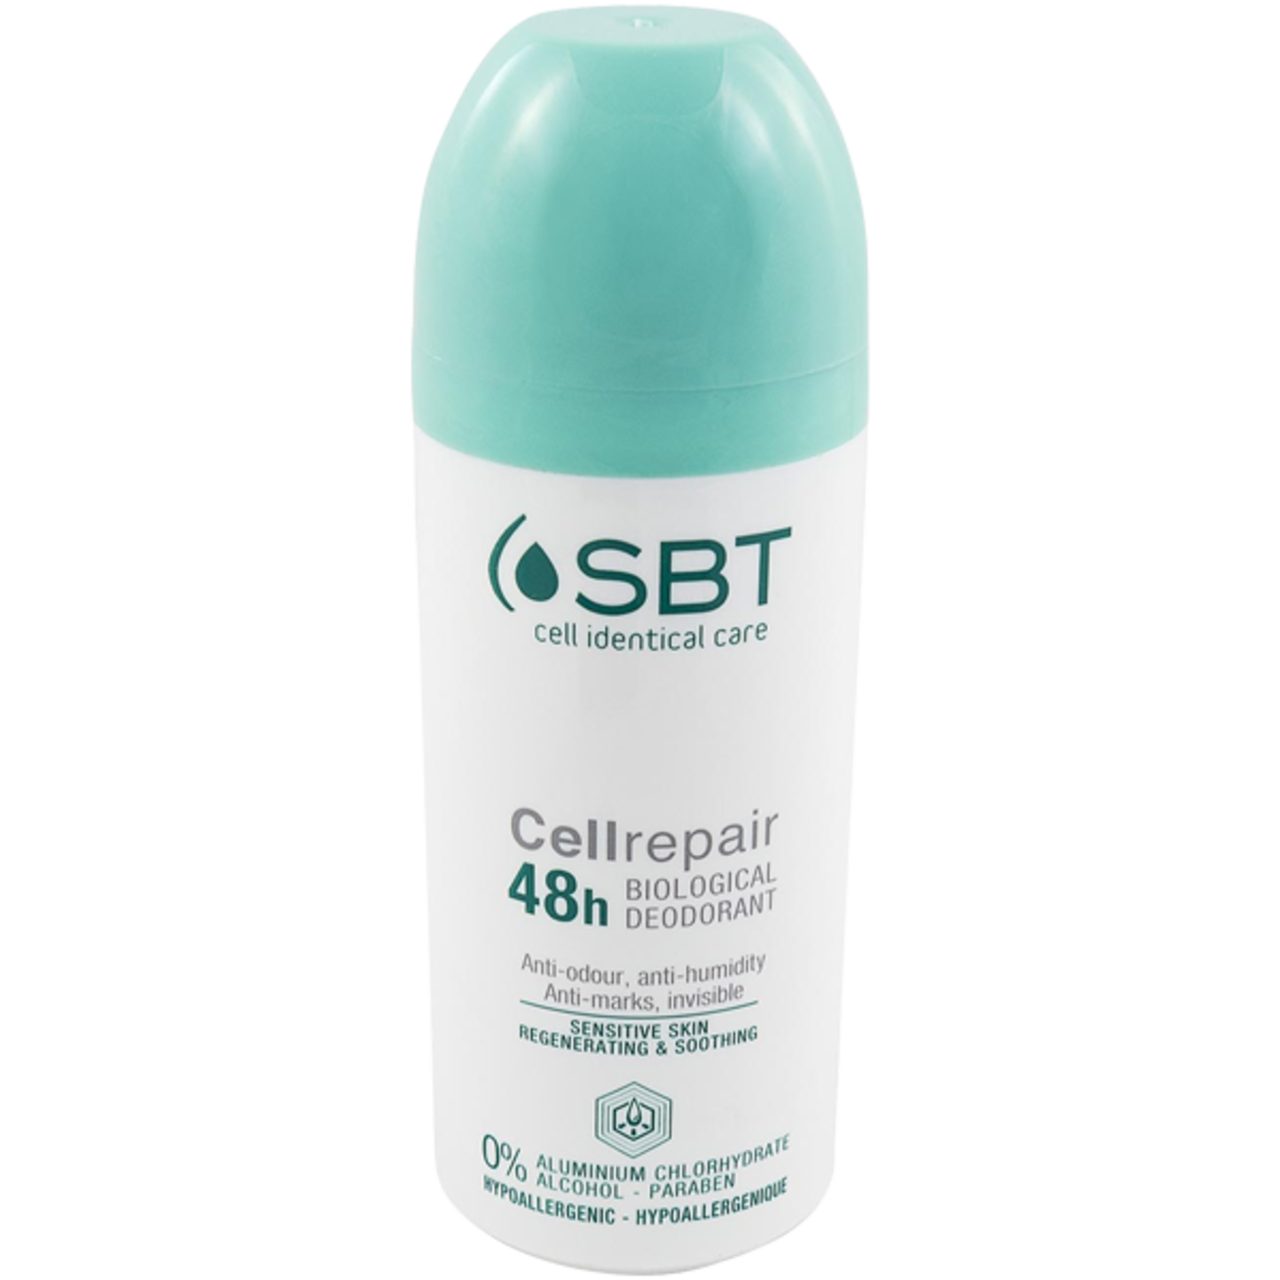 SBT cell identical care Deo-Roller Life Repair Cell Nutrition Anti-Humidity Roll-on Deodorant